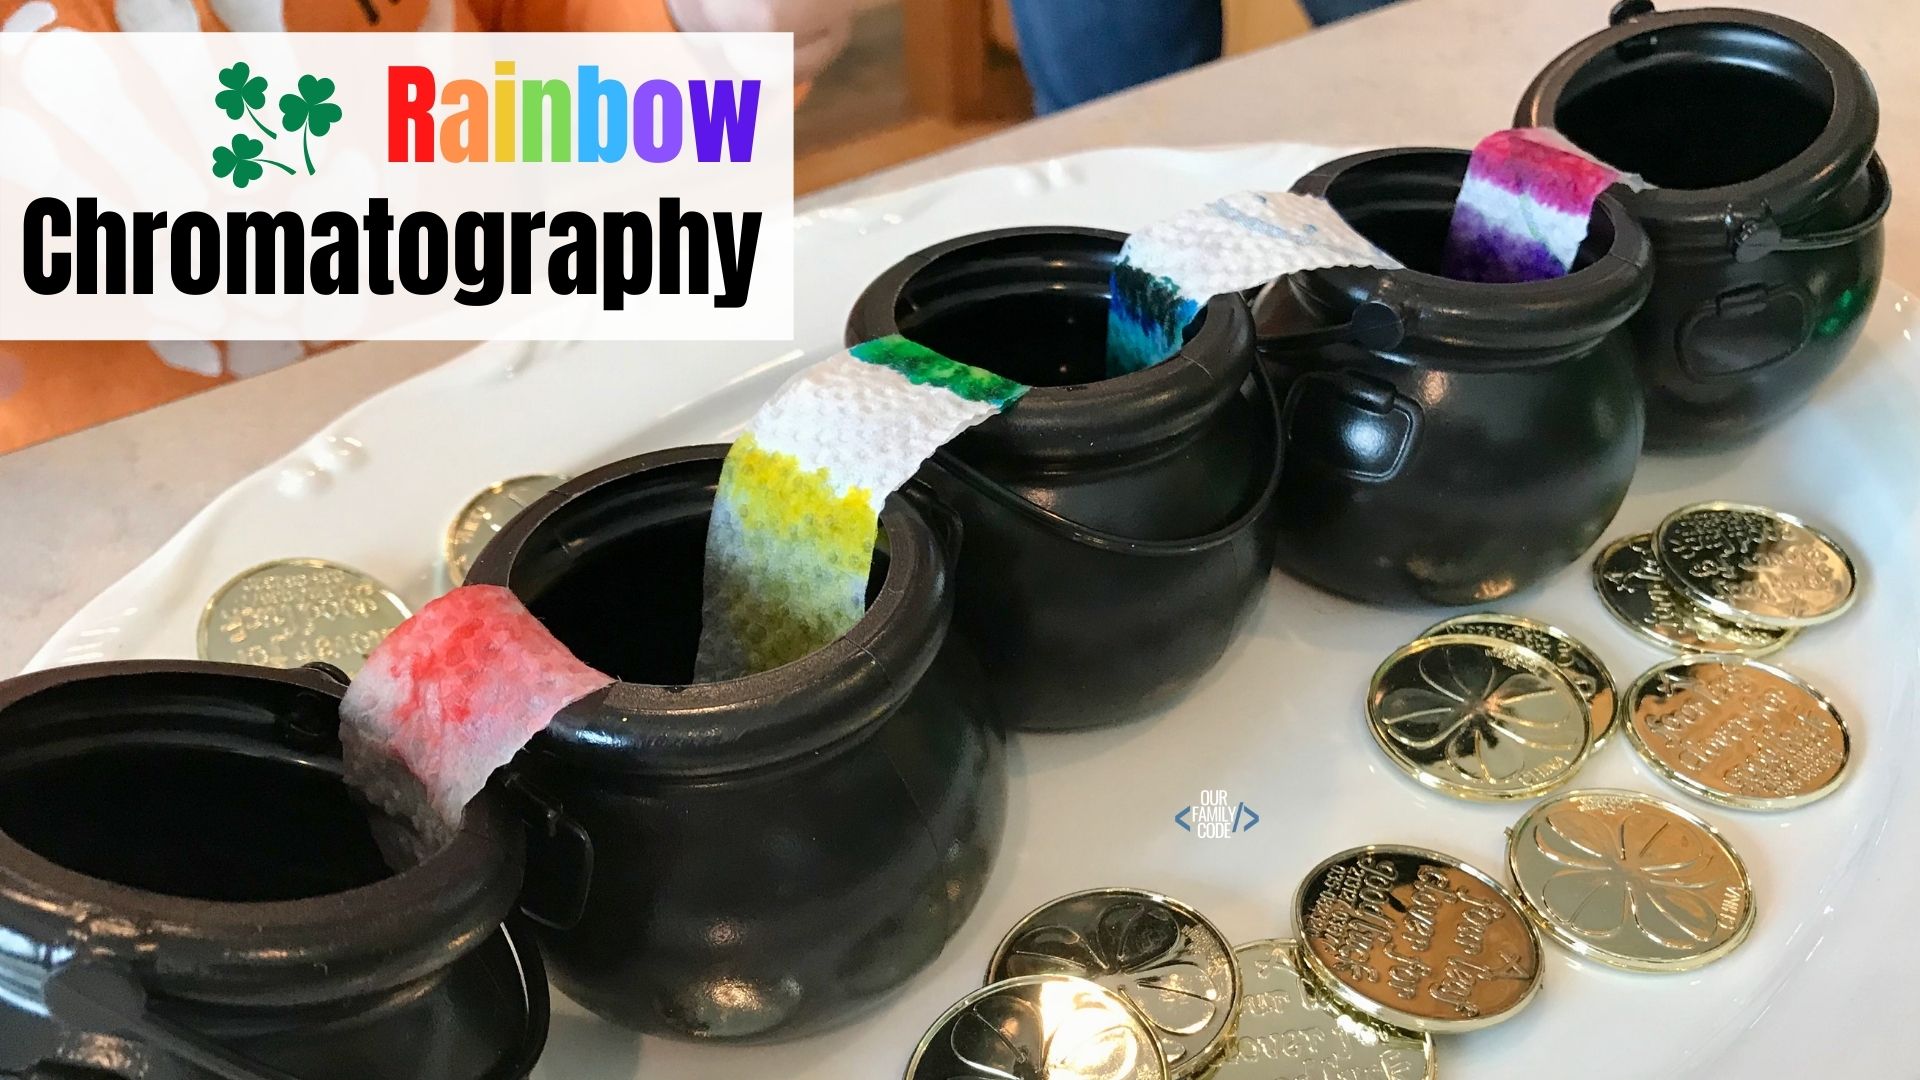 a picture of rainbow chromatography post header with black cauldrons on white plate with gold coins.